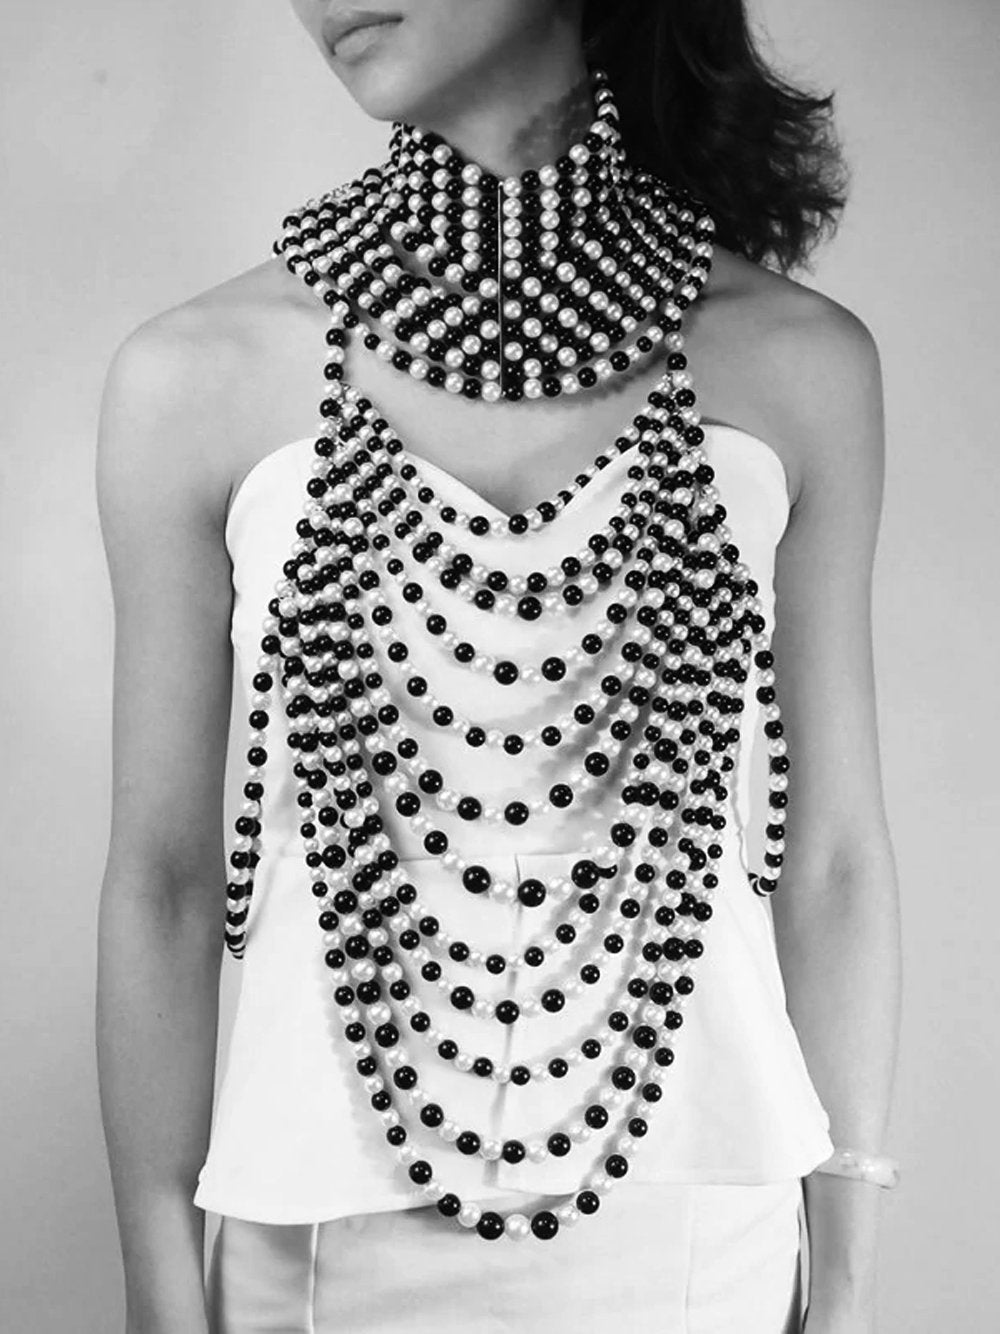 Body Chain Top & Necklace Set in B&W